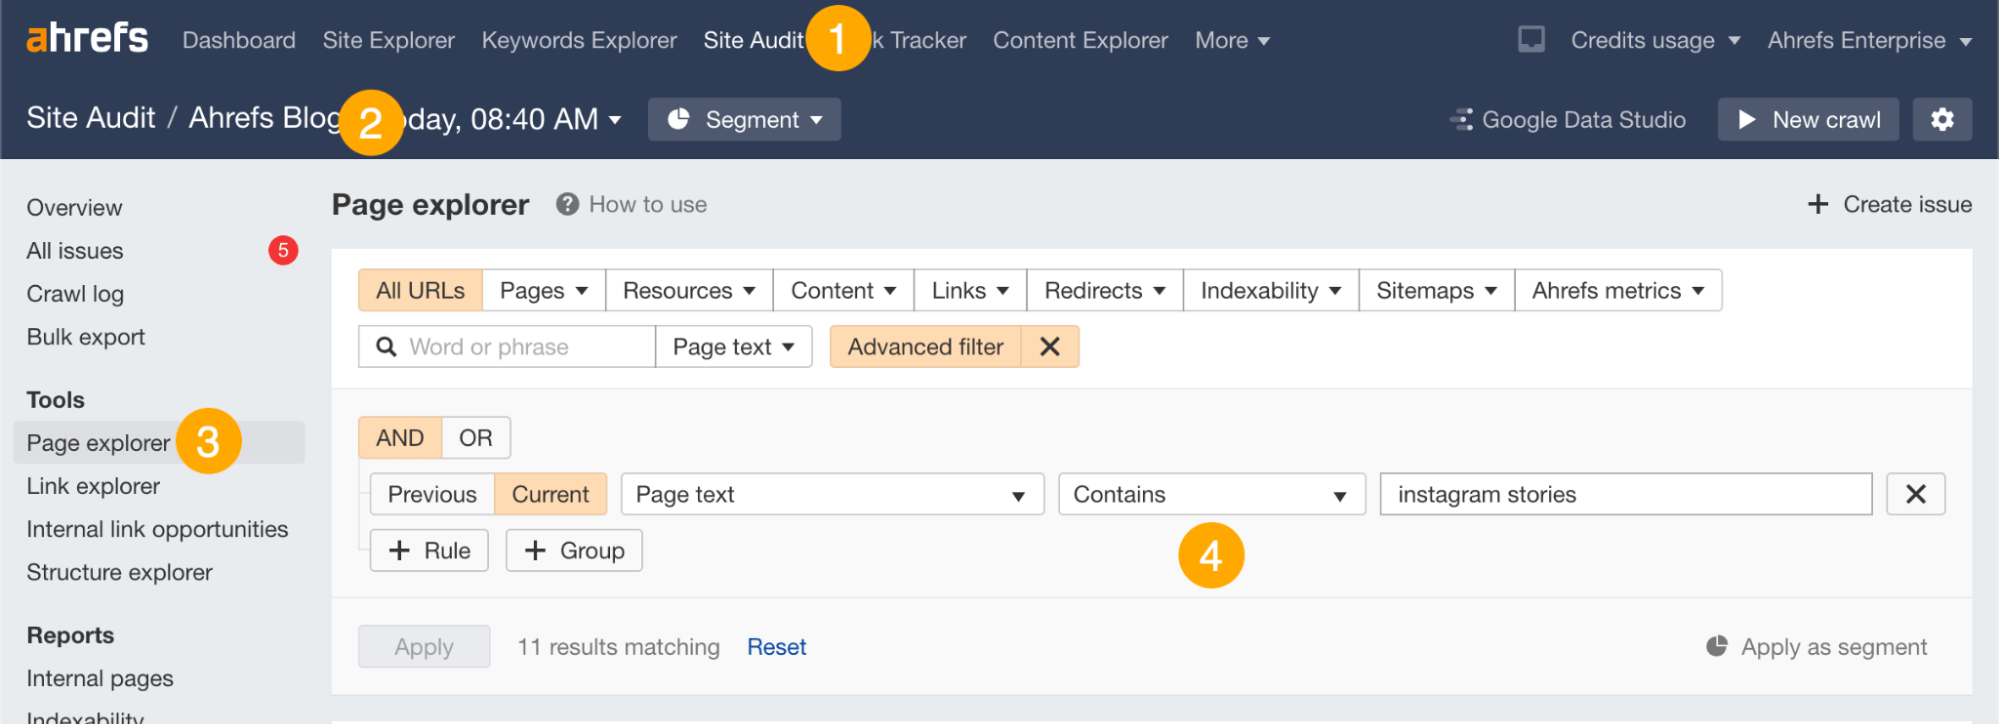 Find a relevant place for your link with Page Explorer, via Ahrefs' Site Audit 